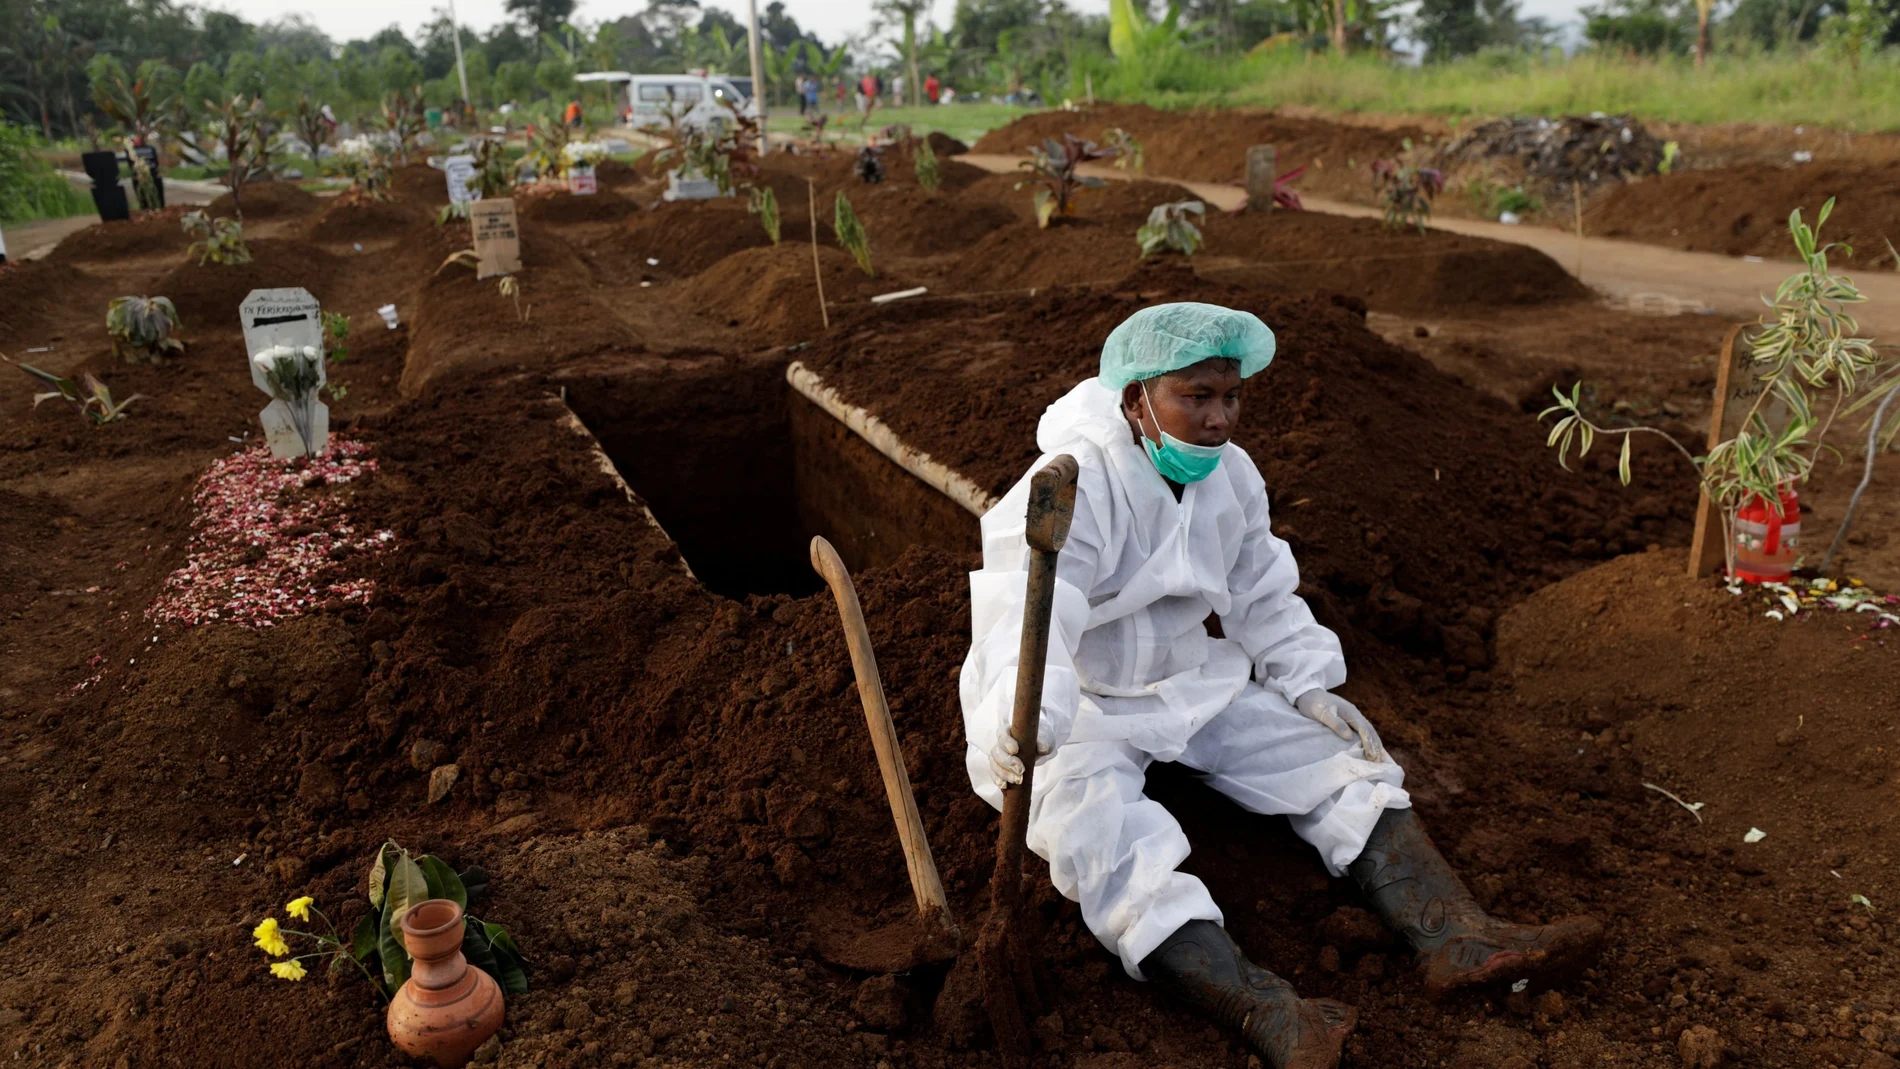 FILE PHOTO: A gravedigger wearing personal protective equipment rests after the burial of 64-year-old Yoyoh Sa'diah who passed away due to complications related to COVID-19 whilst isolating at her home in Bogor, West Java province, Indonesia, July 8, 2021. REUTERS/Willy Kurniawan/File Photo